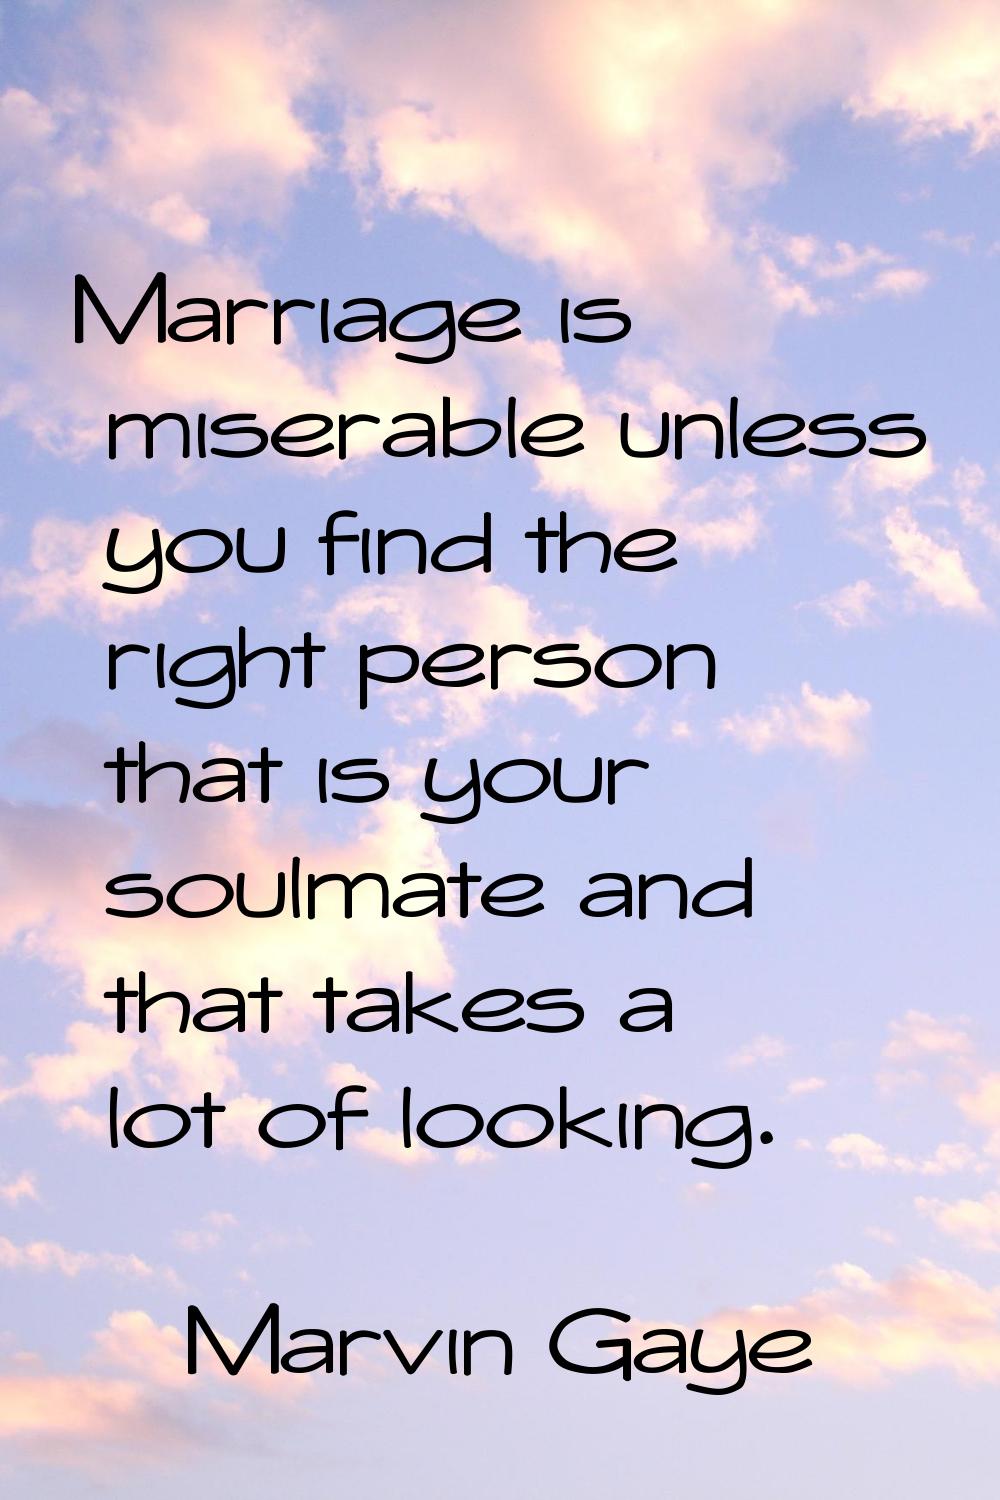 Marriage is miserable unless you find the right person that is your soulmate and that takes a lot o